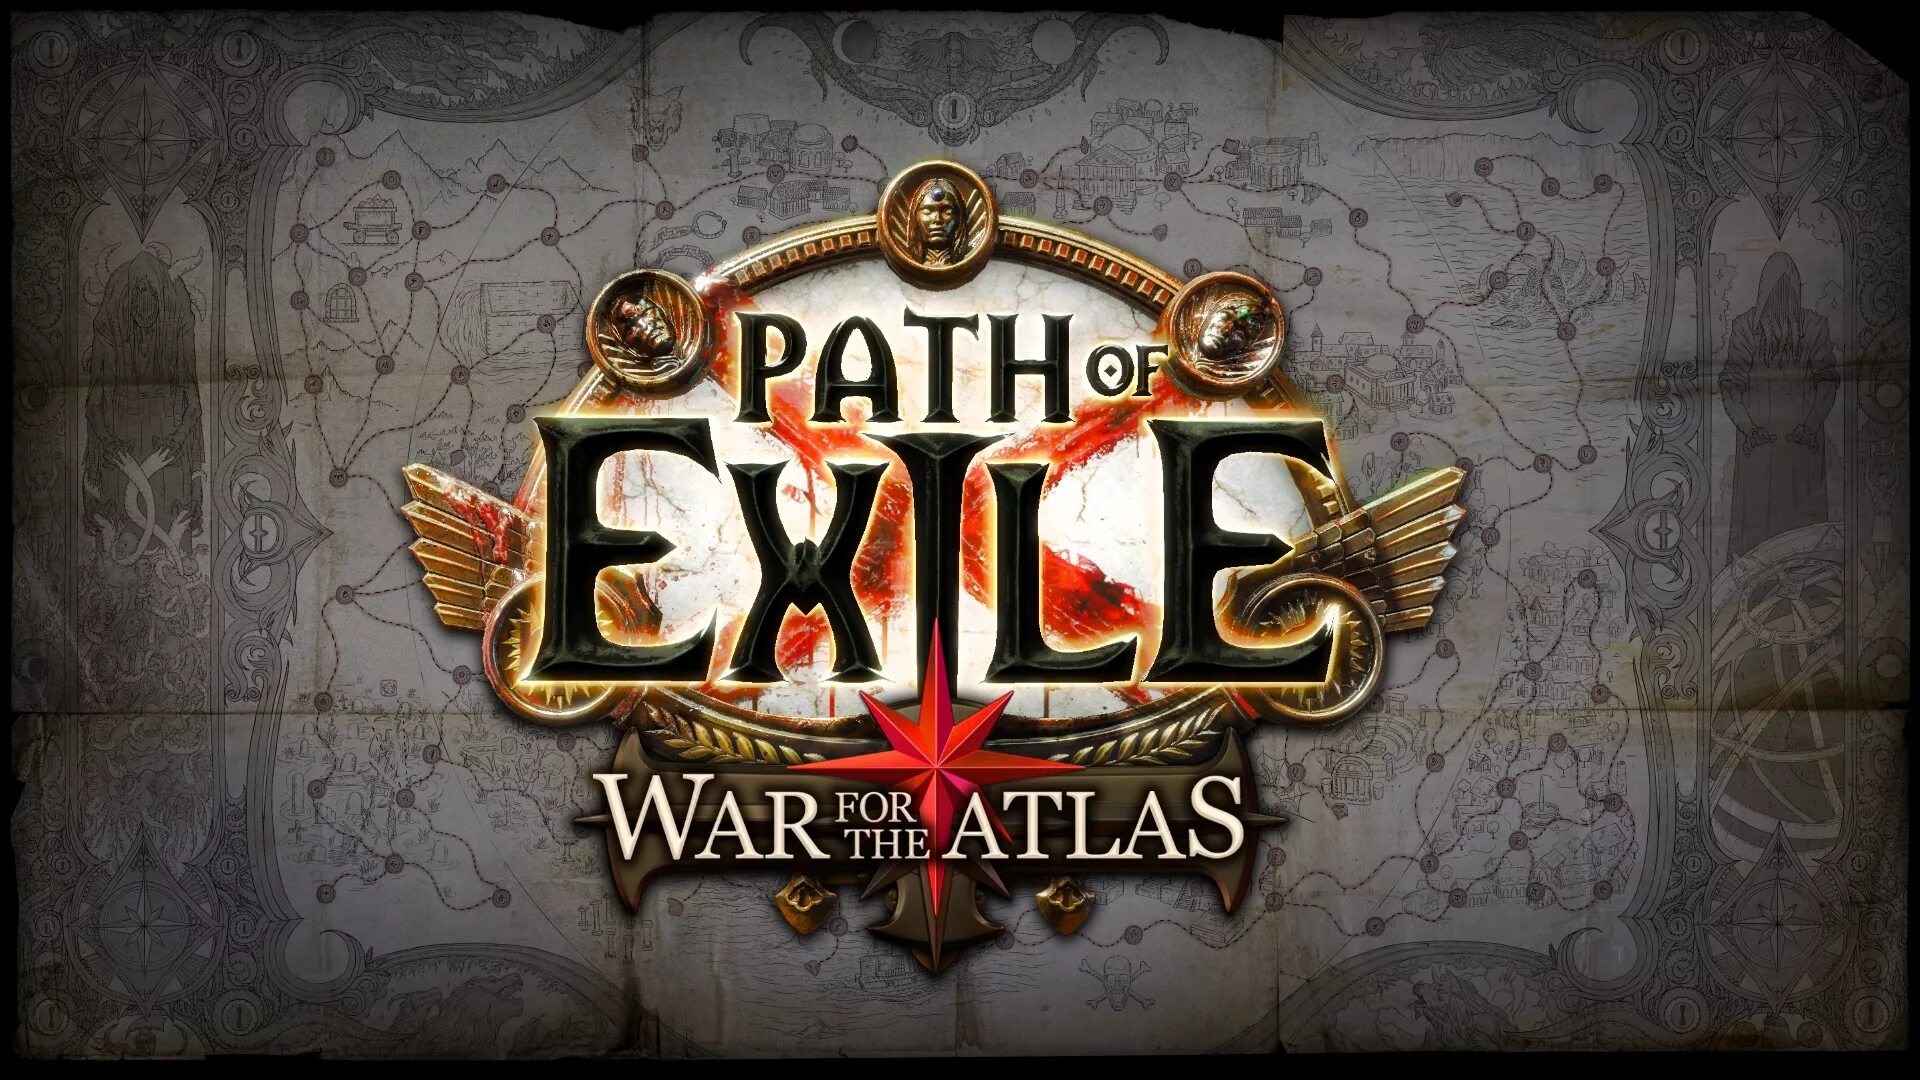 Path of exile 3.24. Delve POE. Pathofexile. Path of Exile mobile. Path of Exile Betrayal.